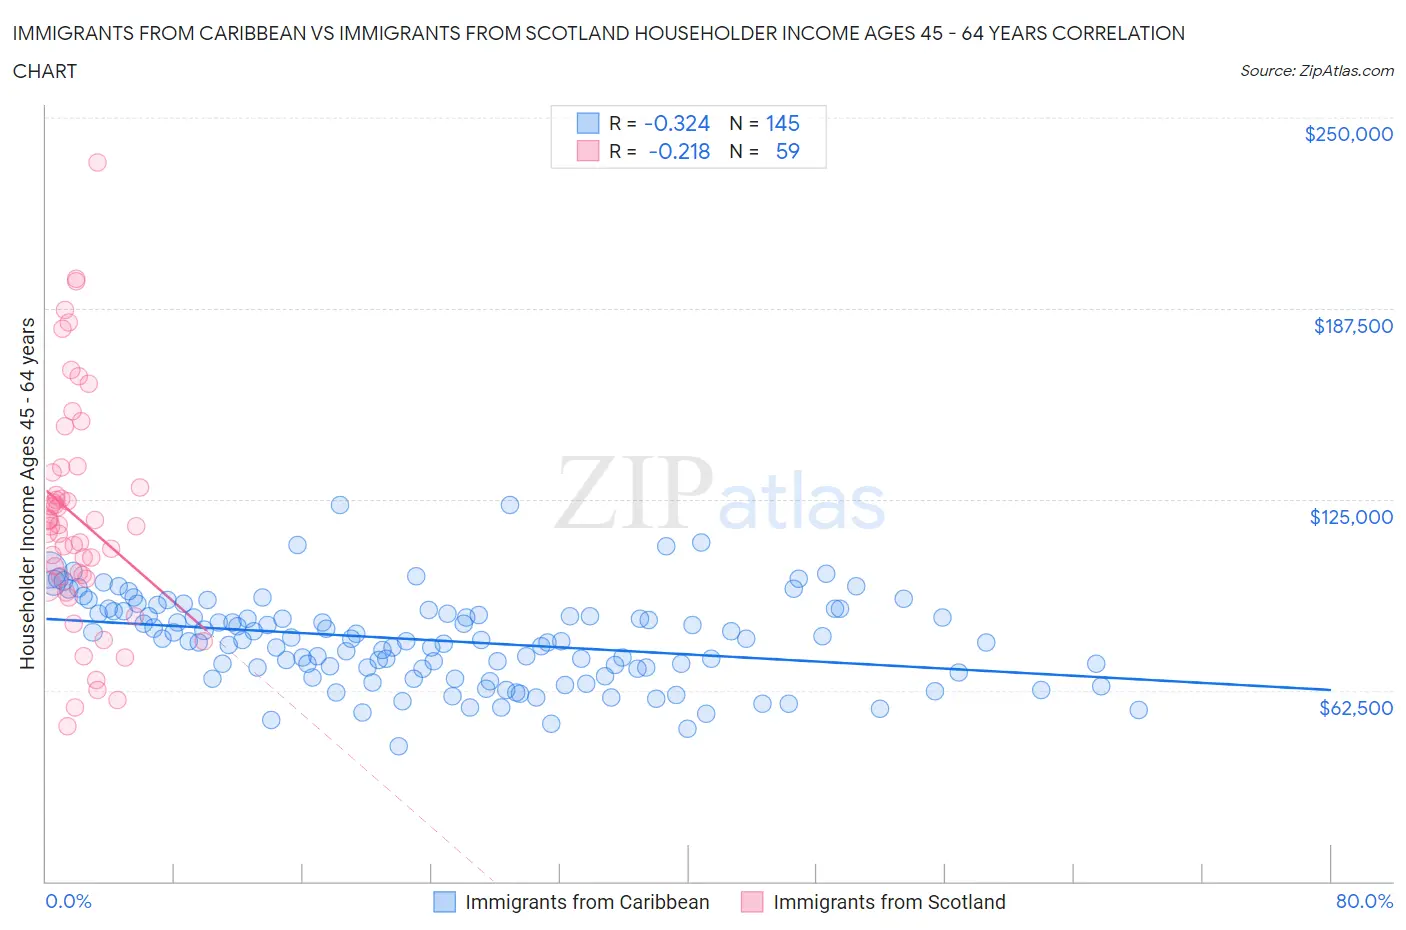 Immigrants from Caribbean vs Immigrants from Scotland Householder Income Ages 45 - 64 years